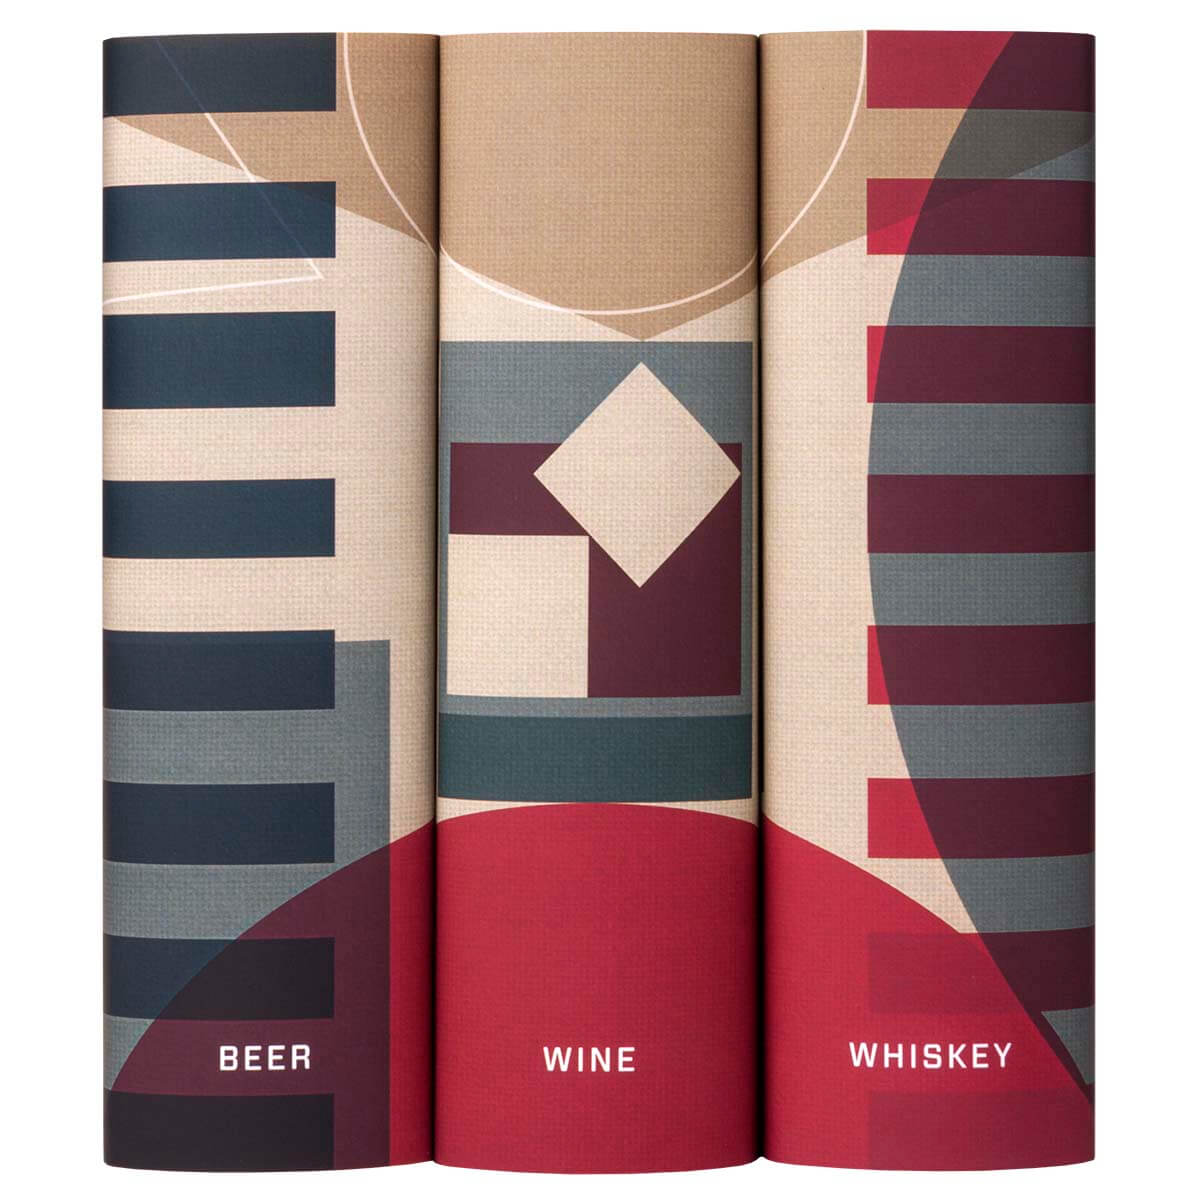 Read It and Drink It (Beer, Wine, Whiskey) - MTO